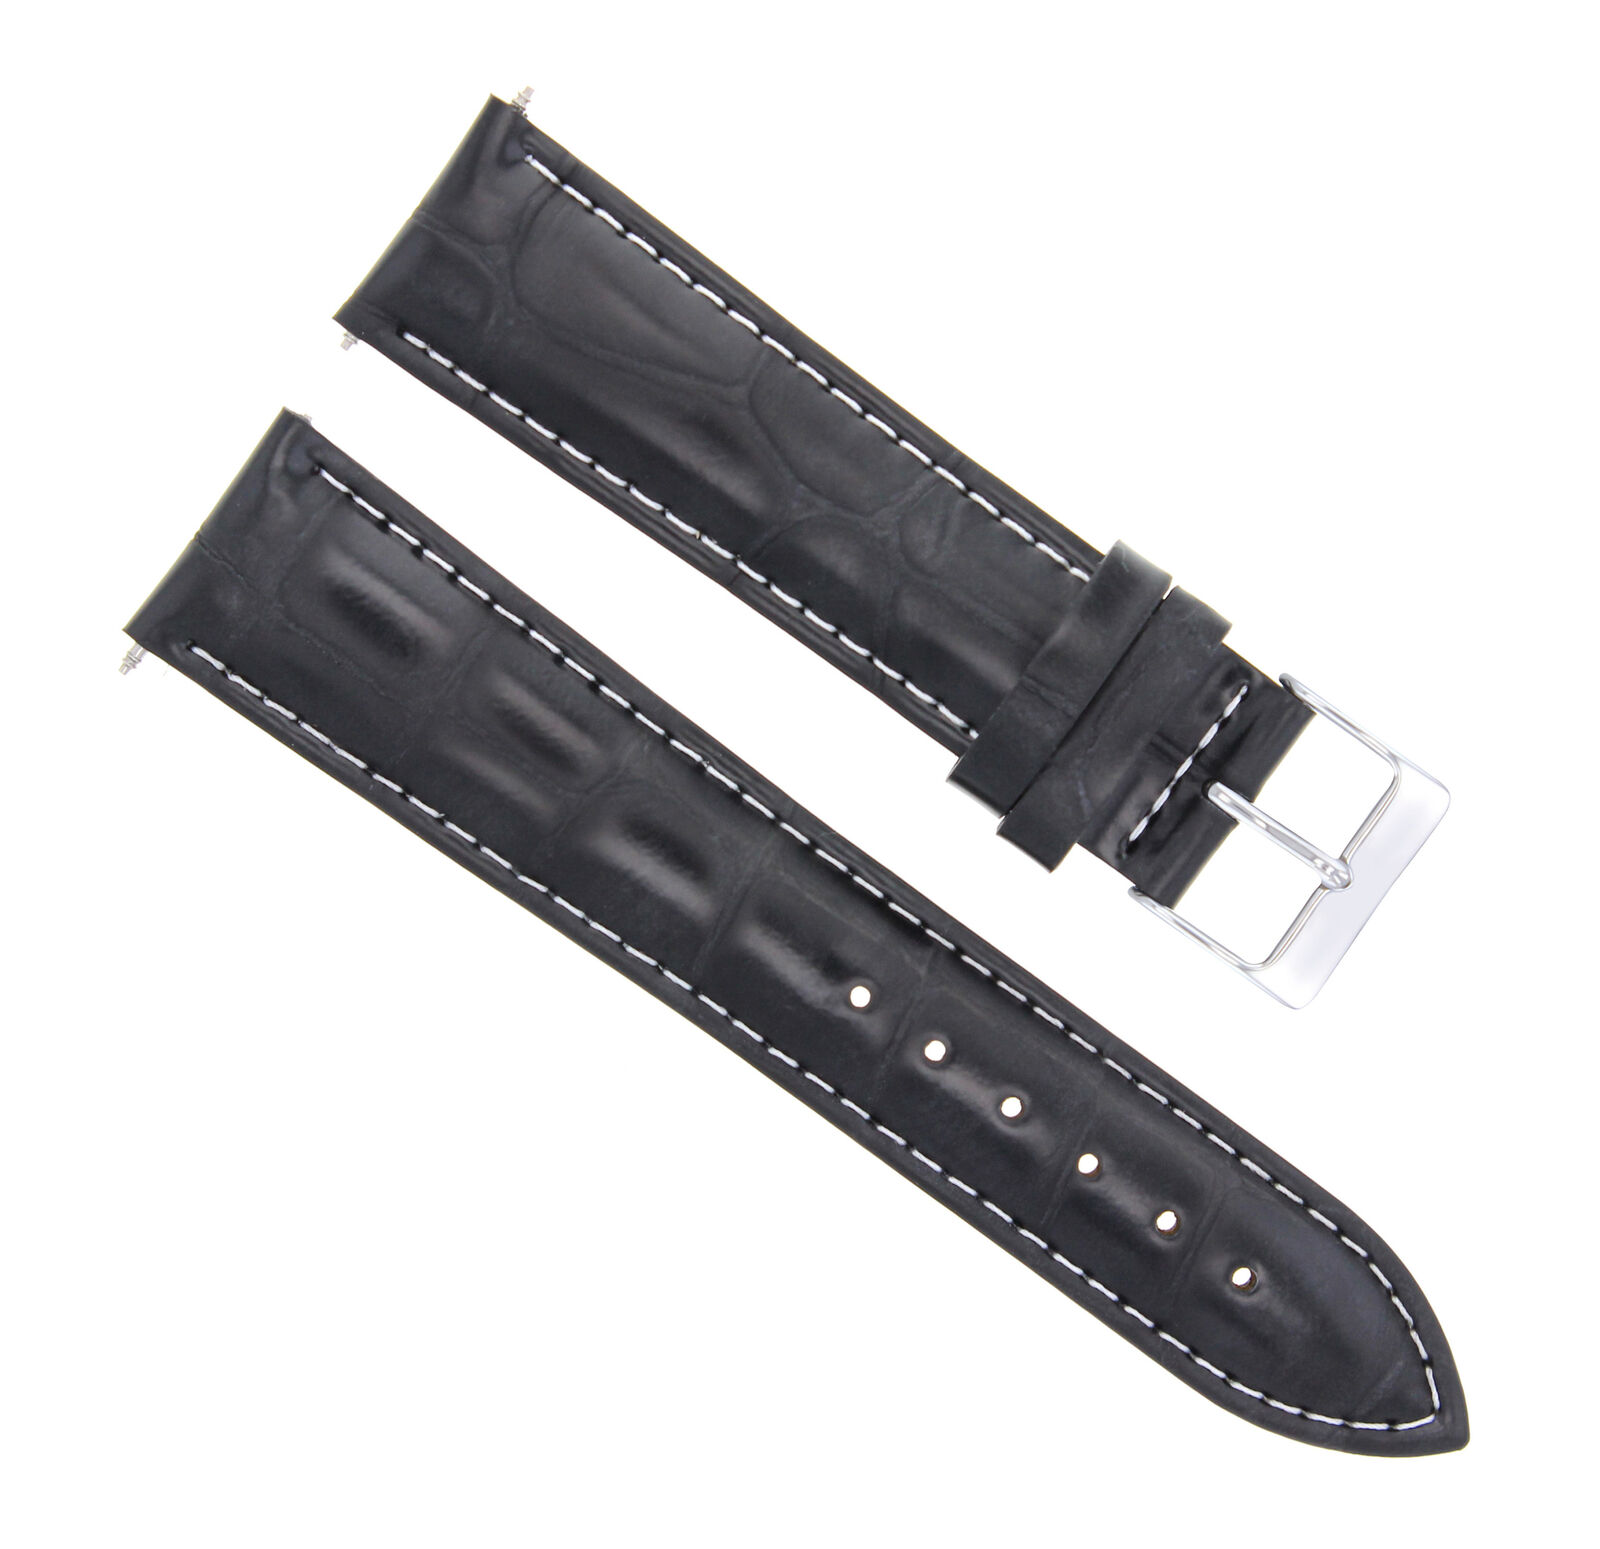 24MM LEATHER WATCH STRAP BAND FOR TAG HEUER FORMULA 1 WATCH BLACK WHITE STITCH